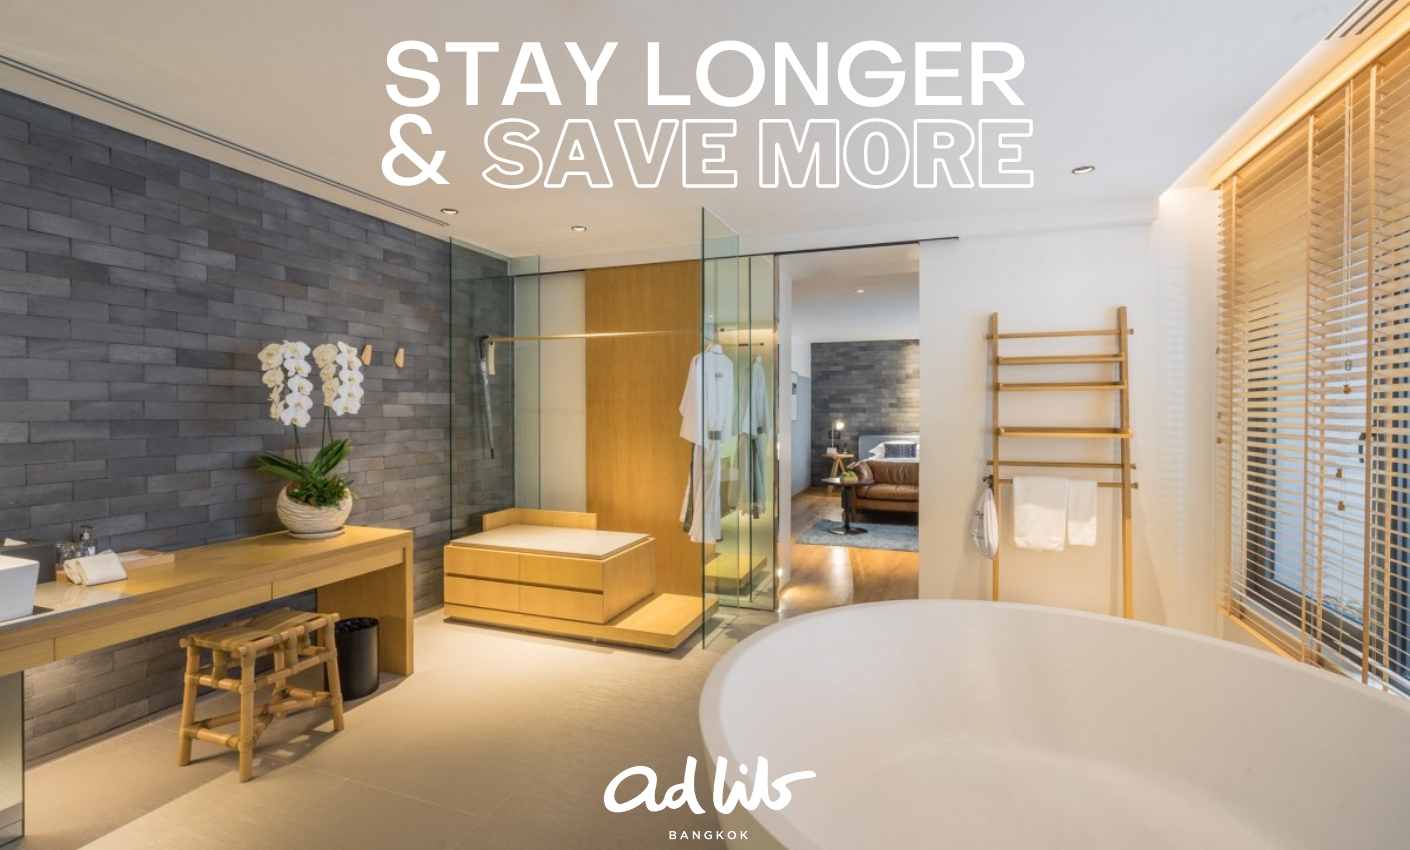 Stay Longer & Save More